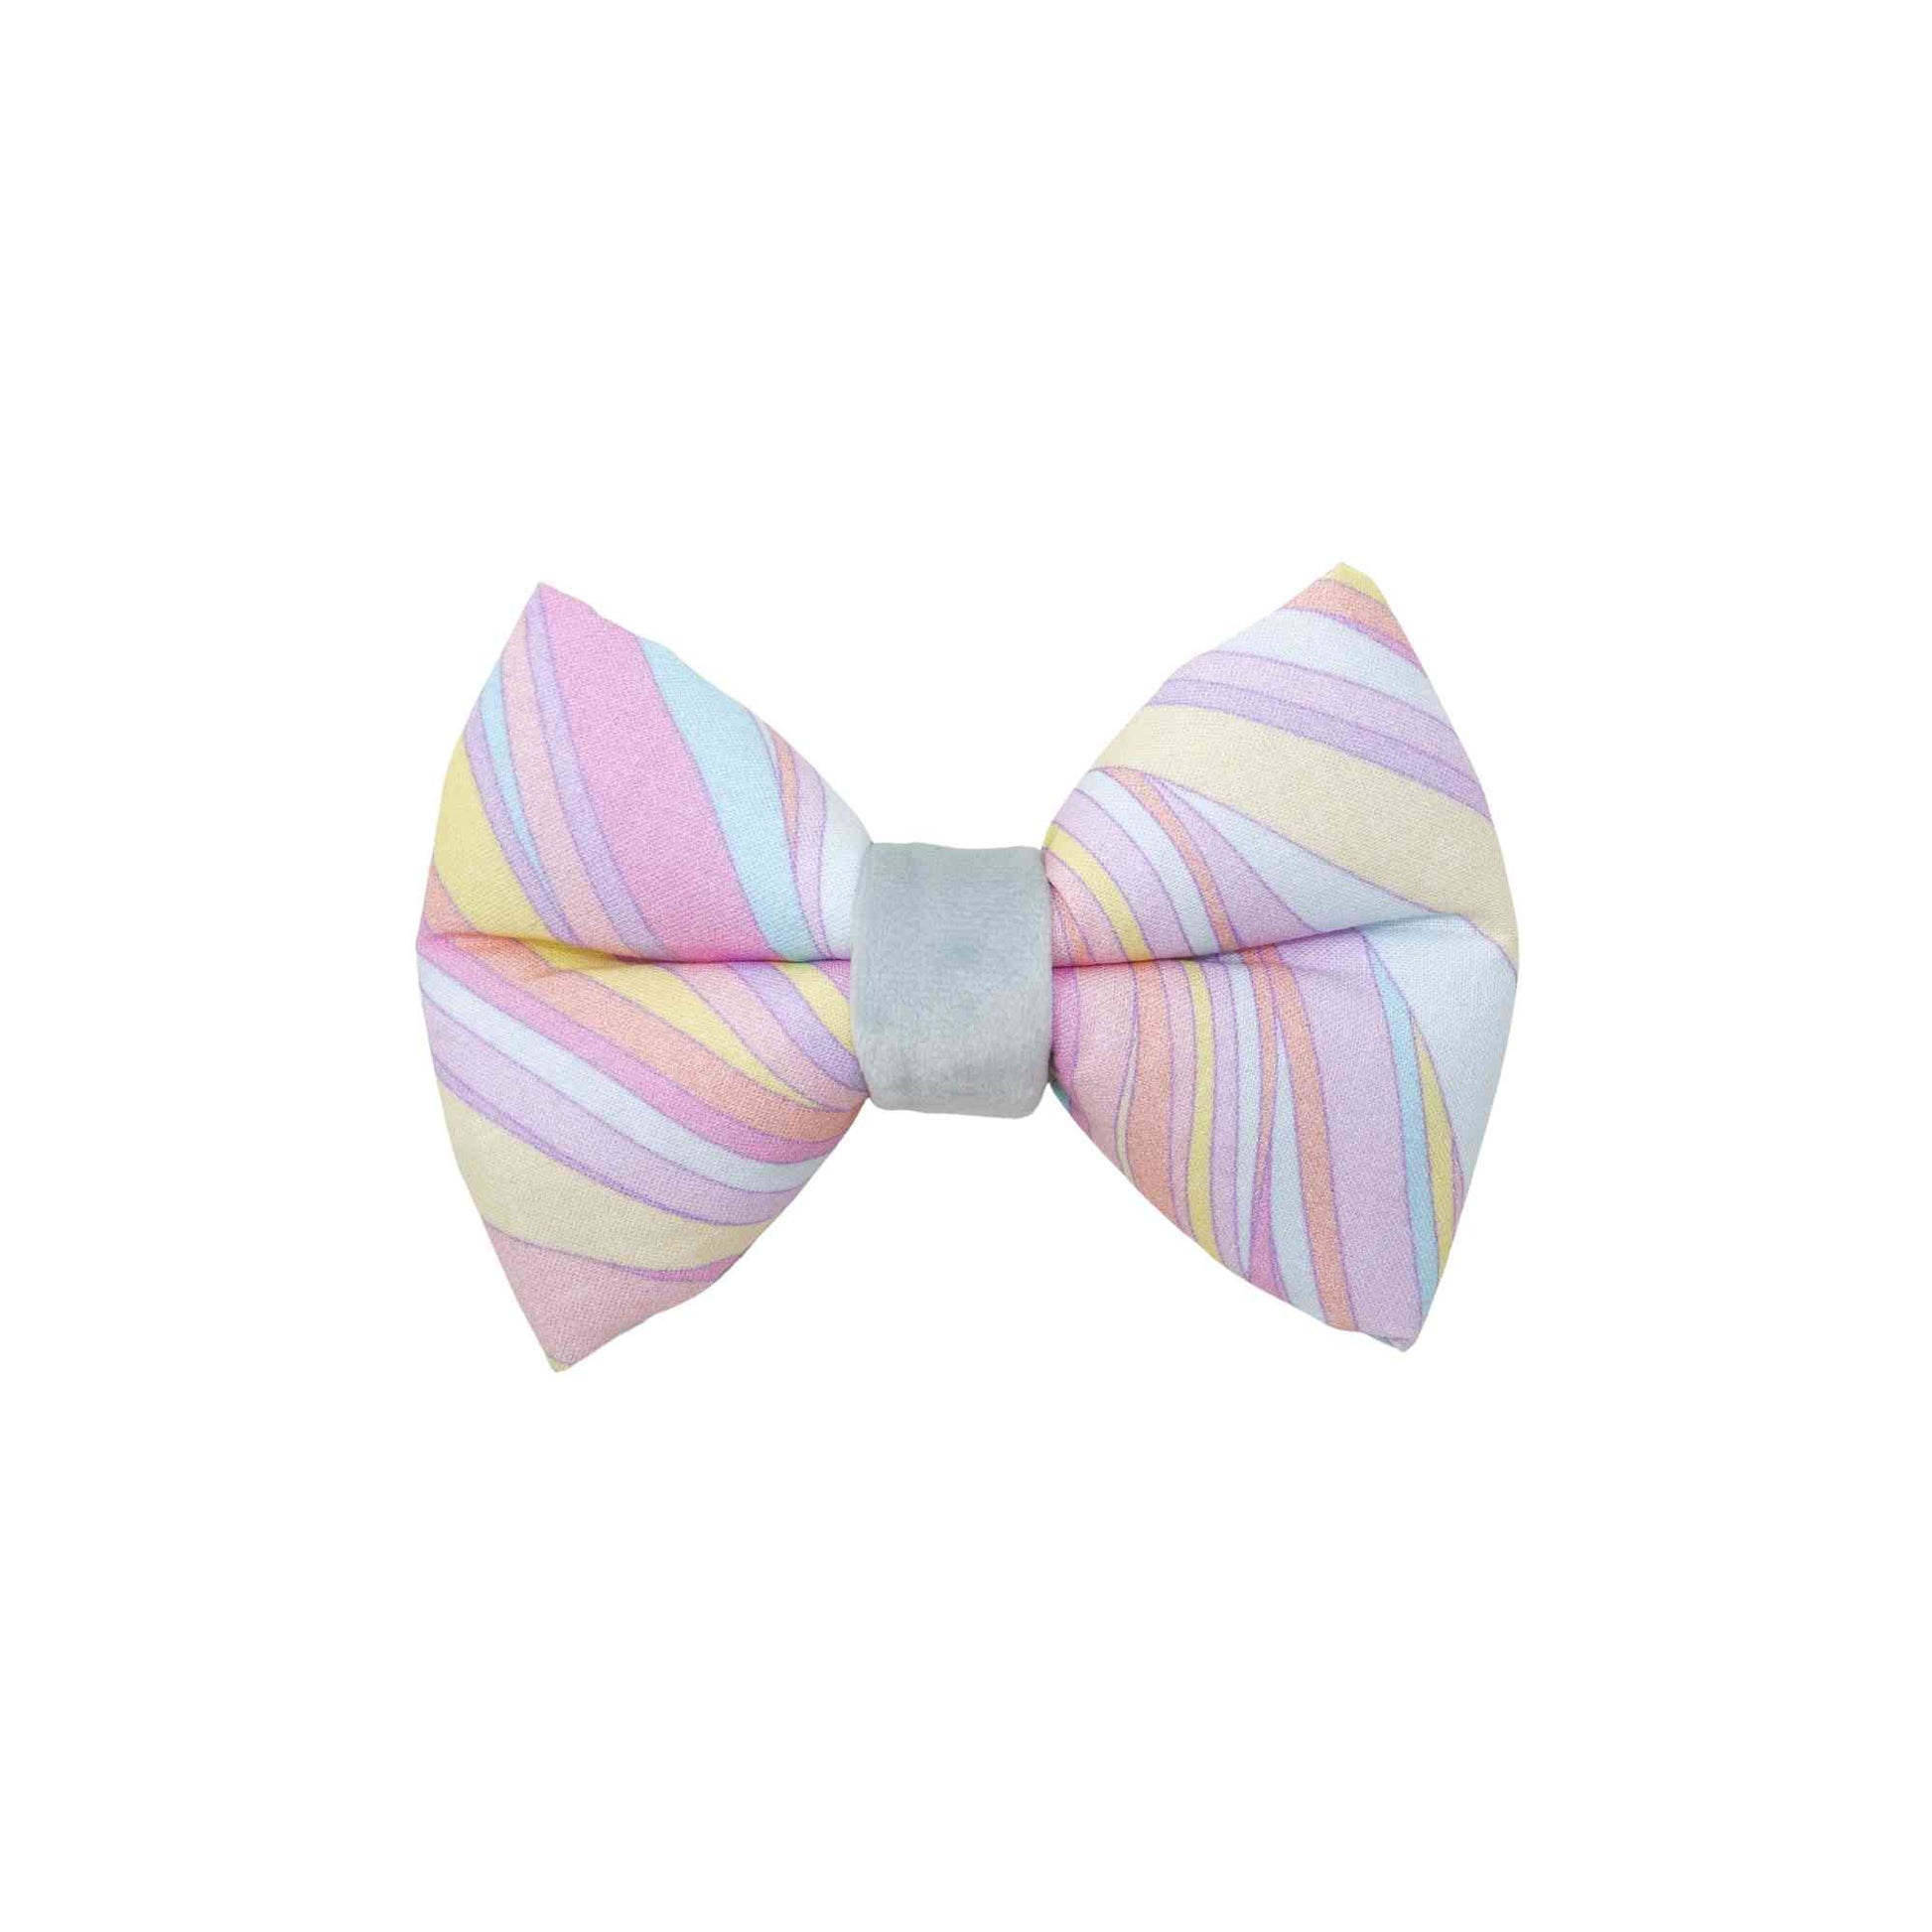 unicorn-pastels-girl-dog-sailor-bow-tie-for-easter-spring